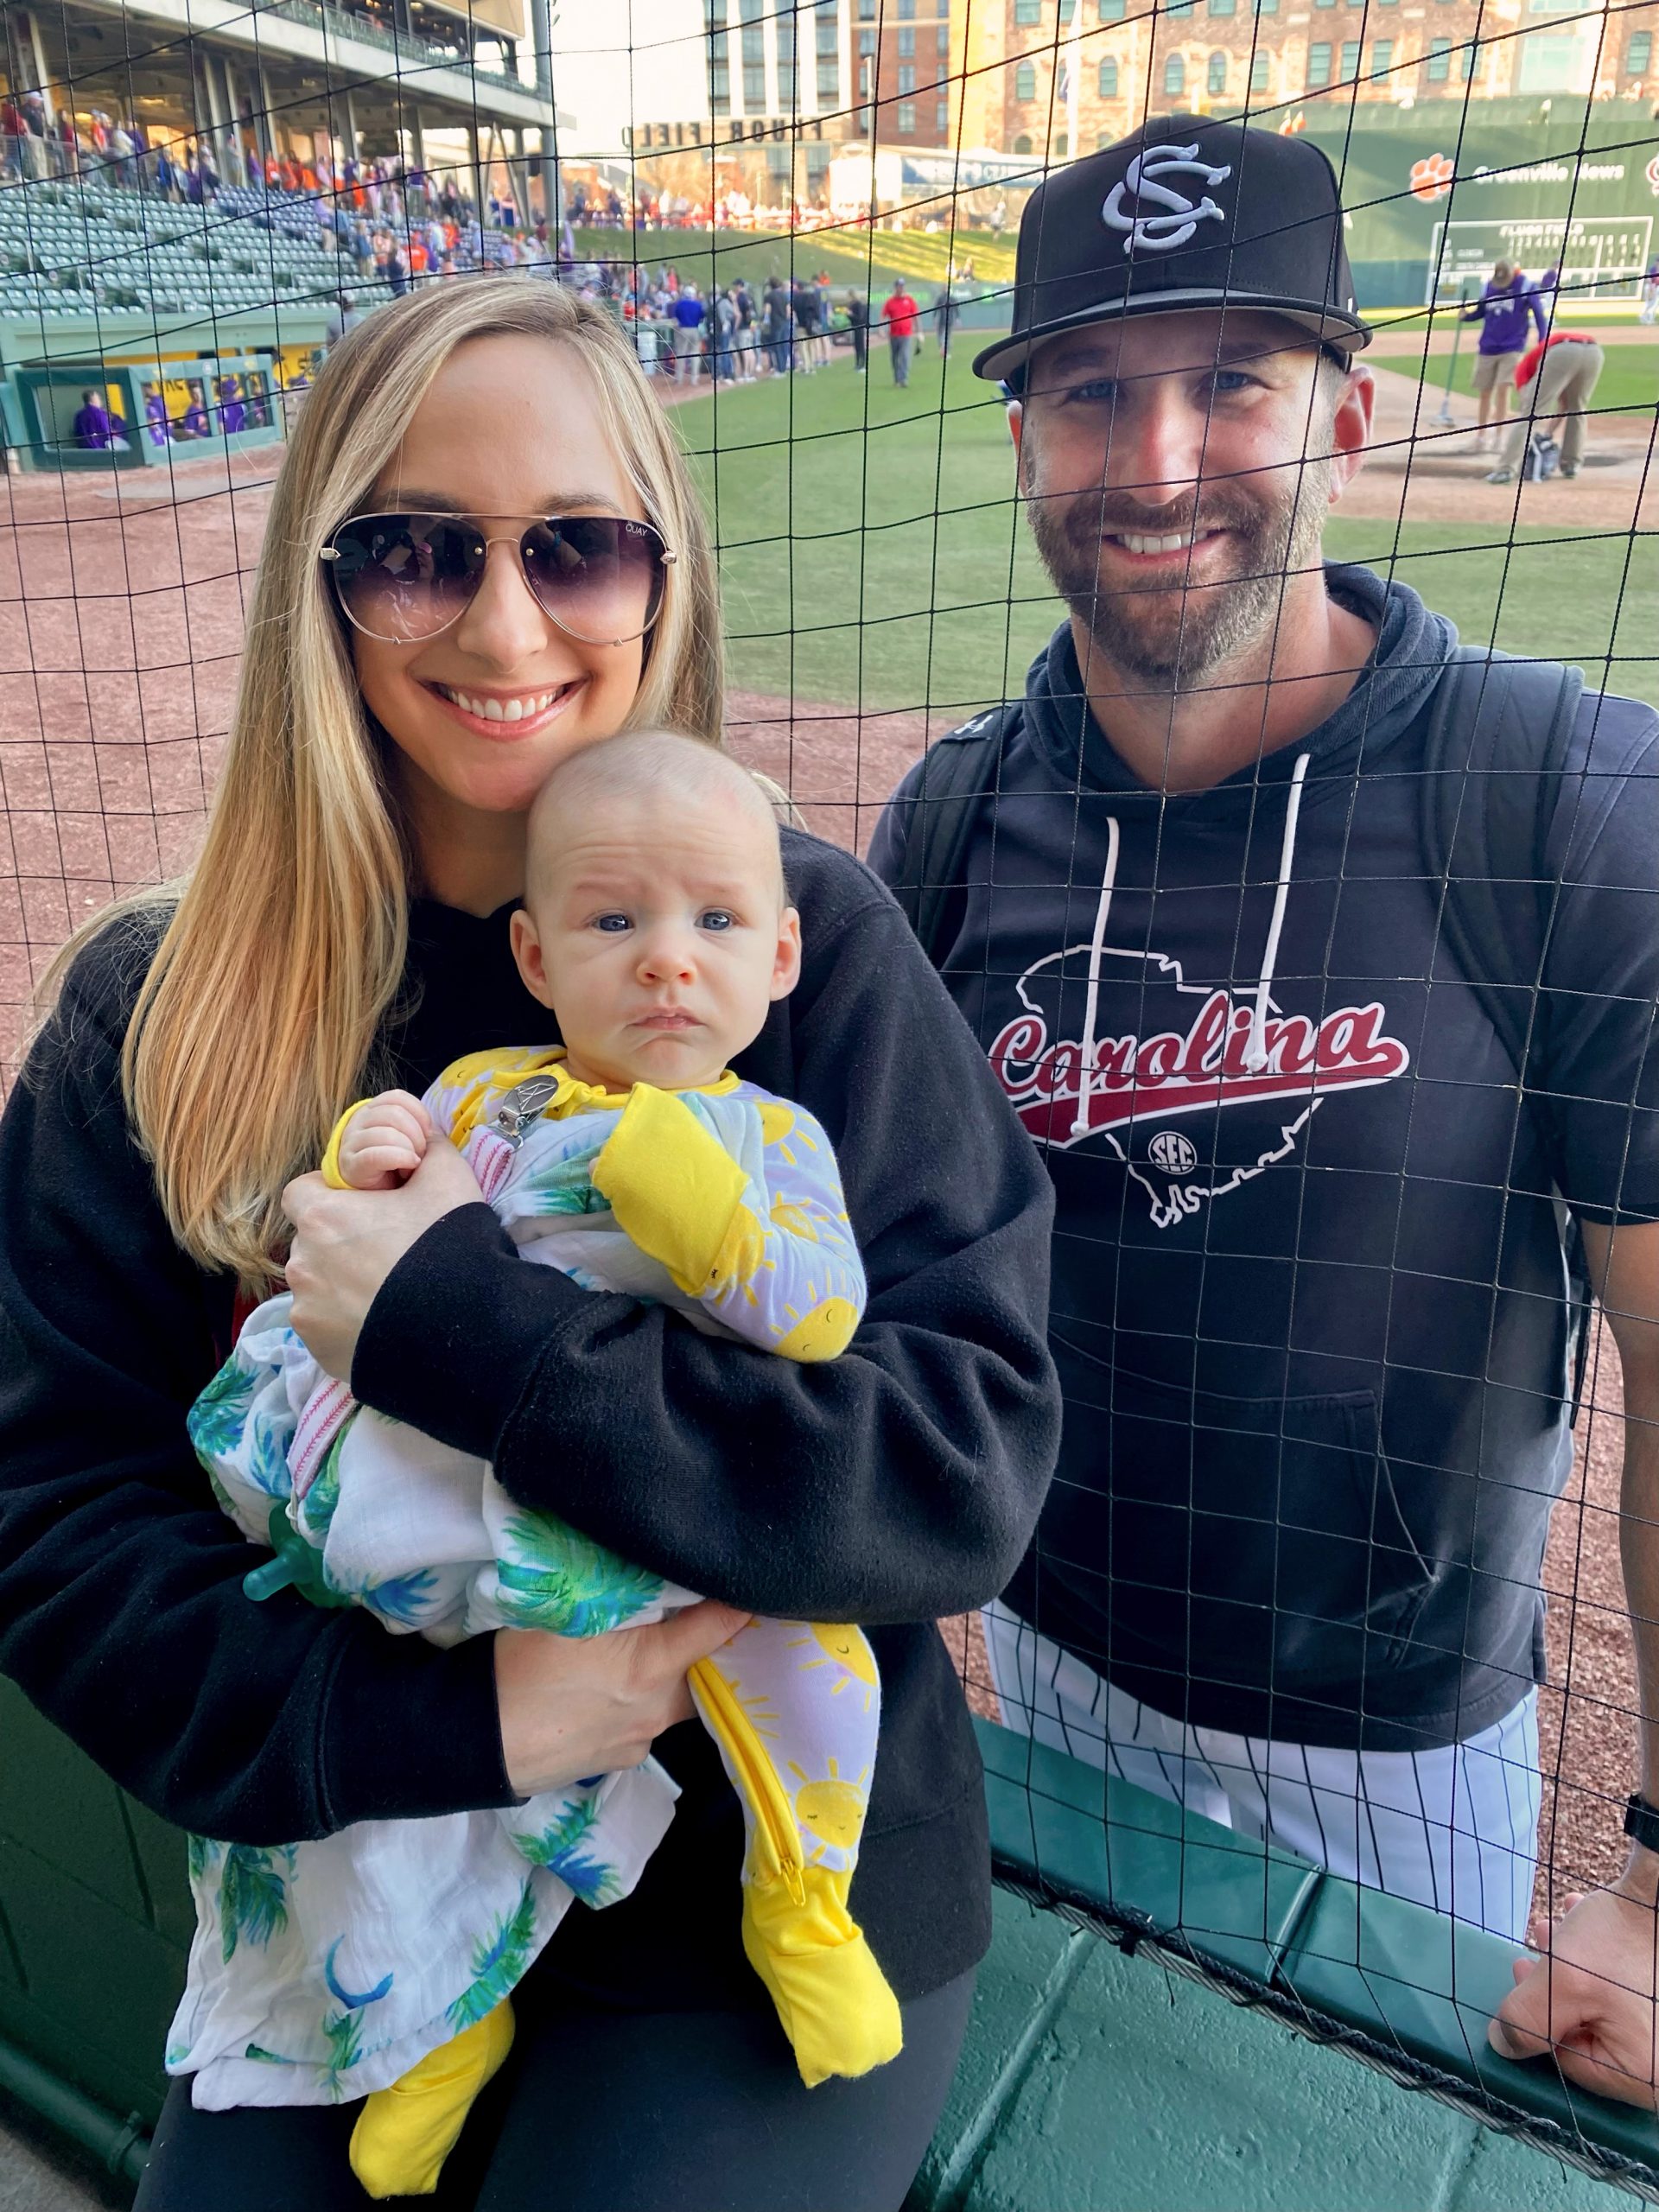 Angela and baby Cameron visit from the dugout with husband and father Justin Parker, who is in his second season as the Carolina pitching coach.